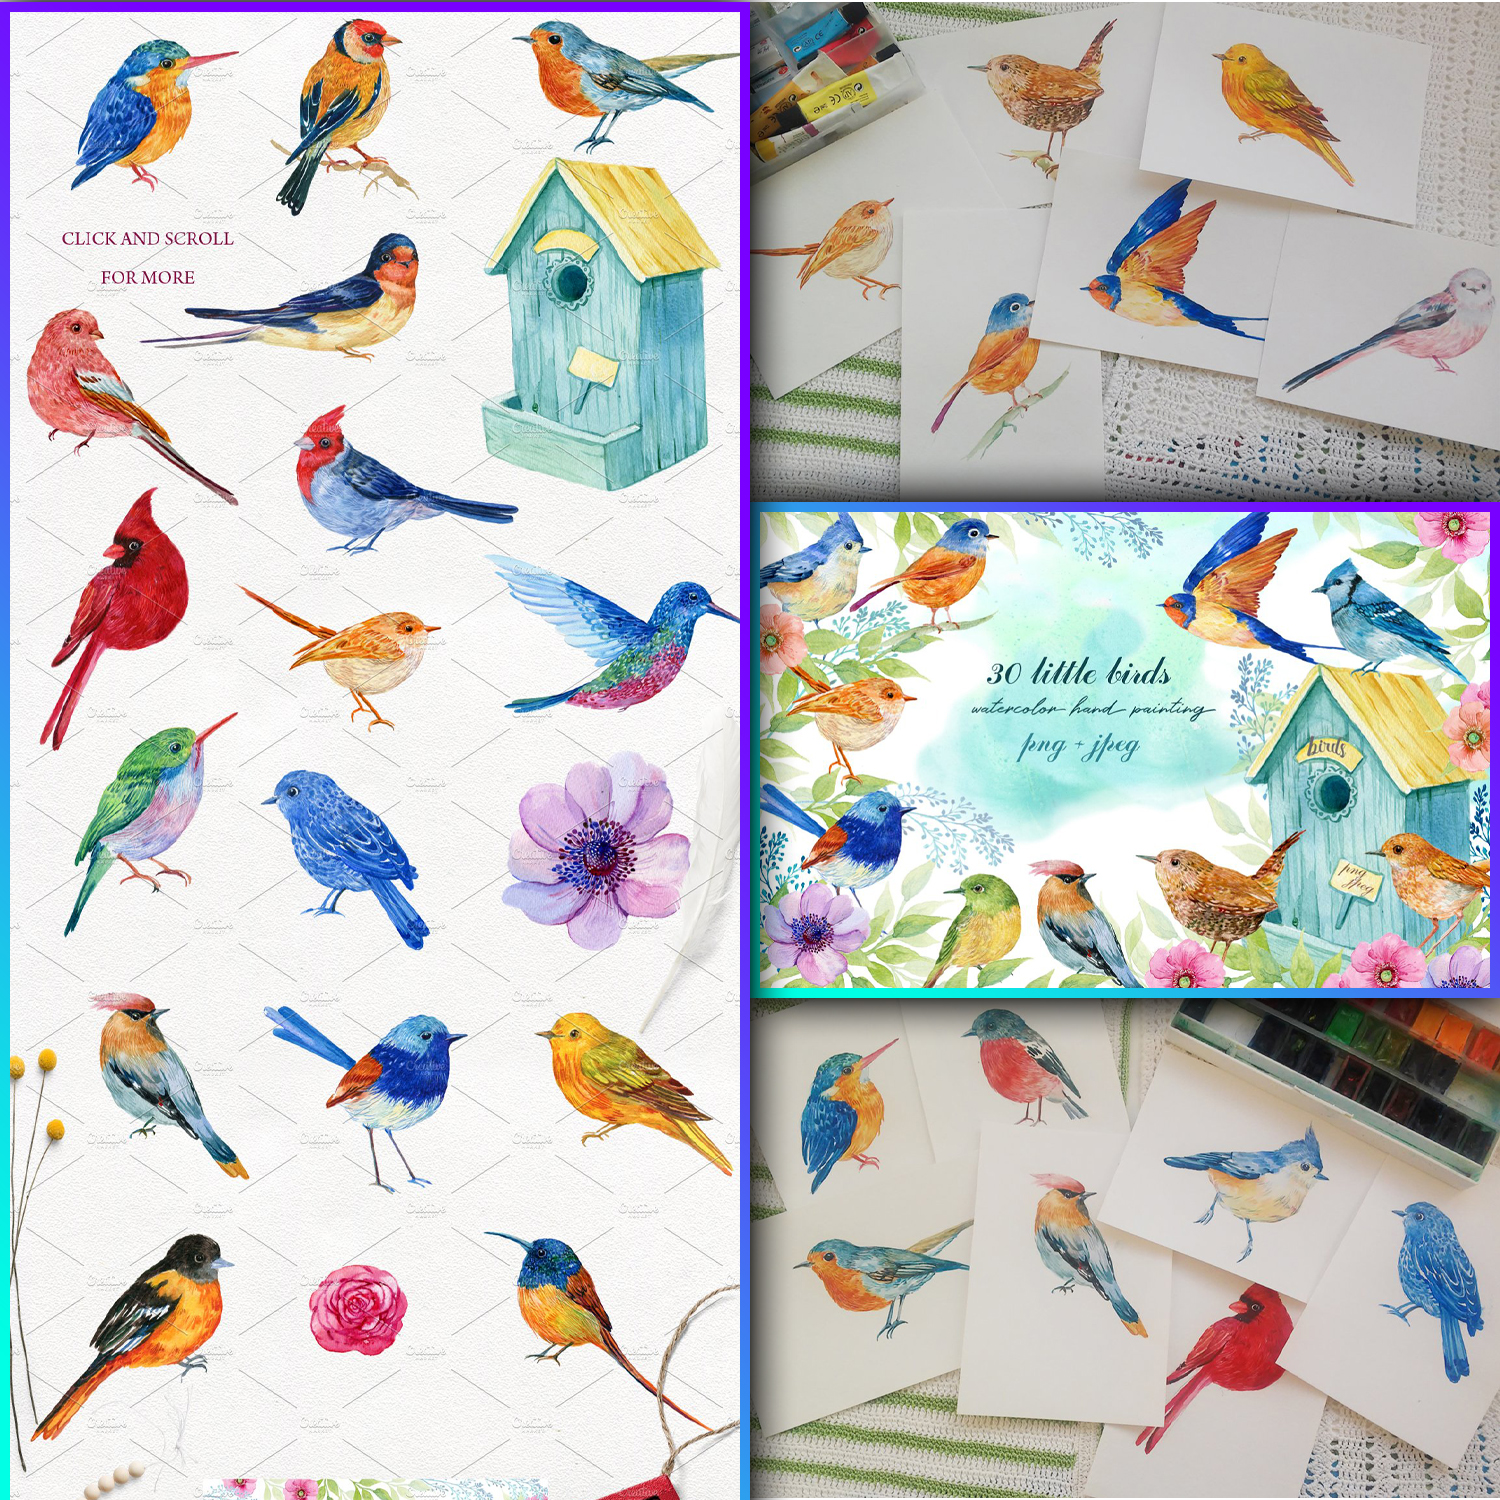 Preview collection of watercolor birds.